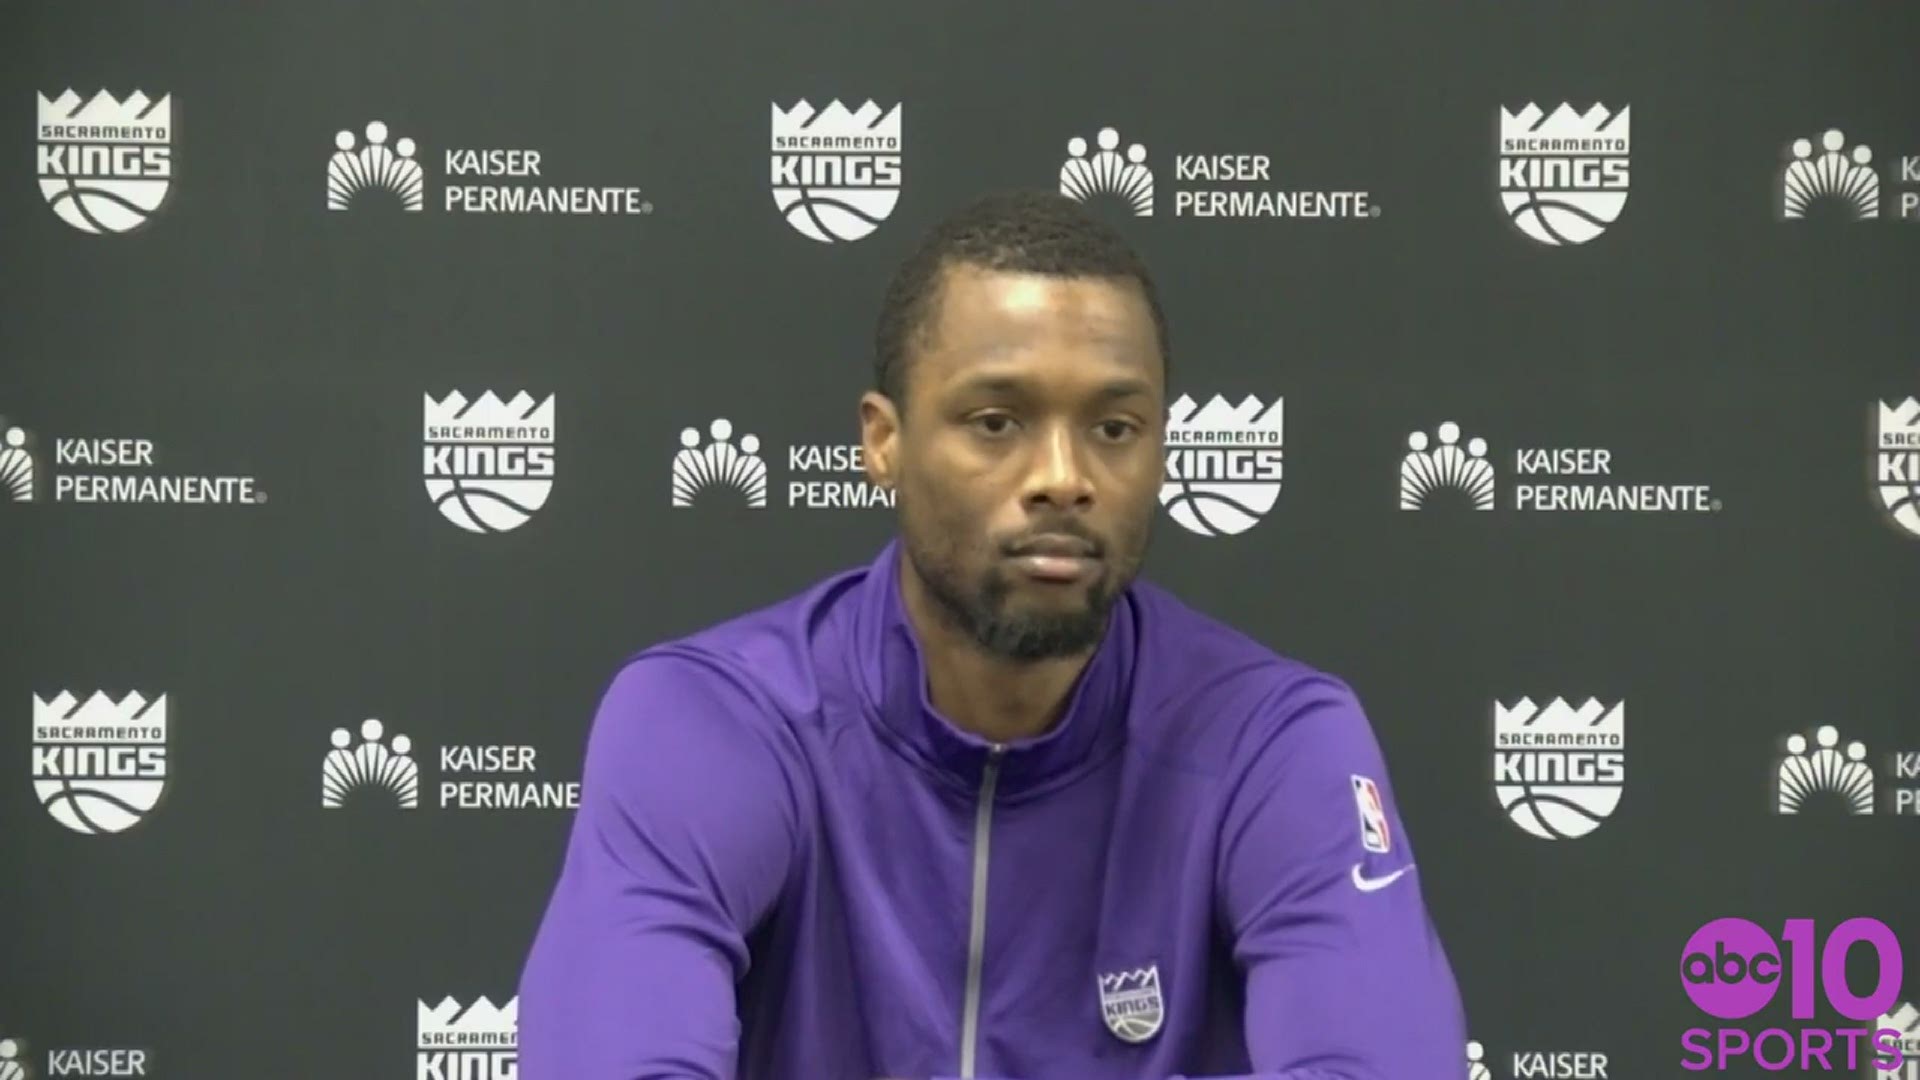 Harrison Barnes tries to explain his Kings' defensive struggles plaguing recent games including Saturday’s 125-99 loss to the Portland Trail Blazers on Saturday.